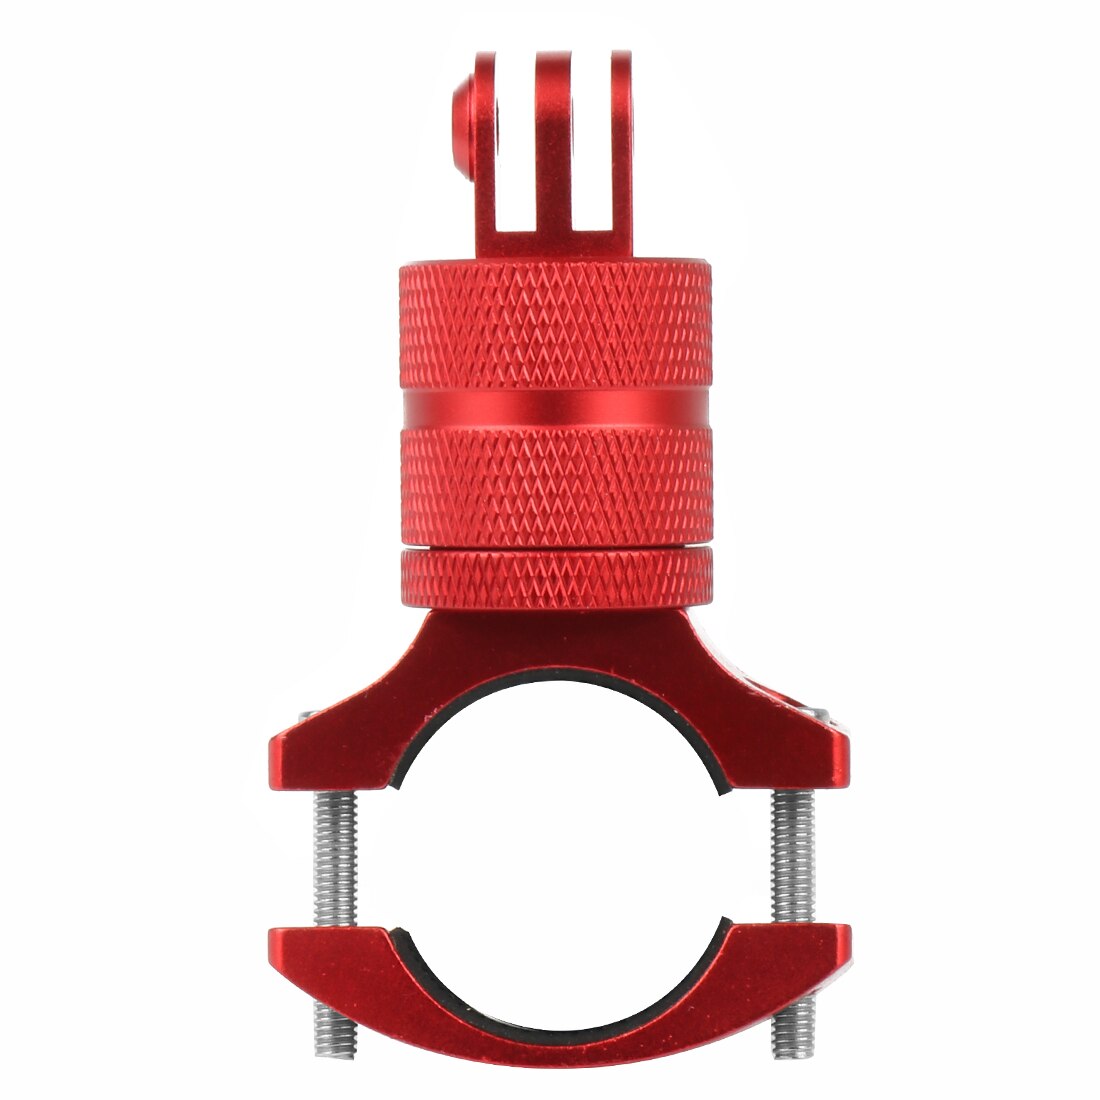 Bicycle Mount Rotatable Bike Handlebar Mount Holder Adapter Bracket for Gopro Hero 10 9 8 7 5 SJ6000 for insta360 Action Cameras: Red No Screw